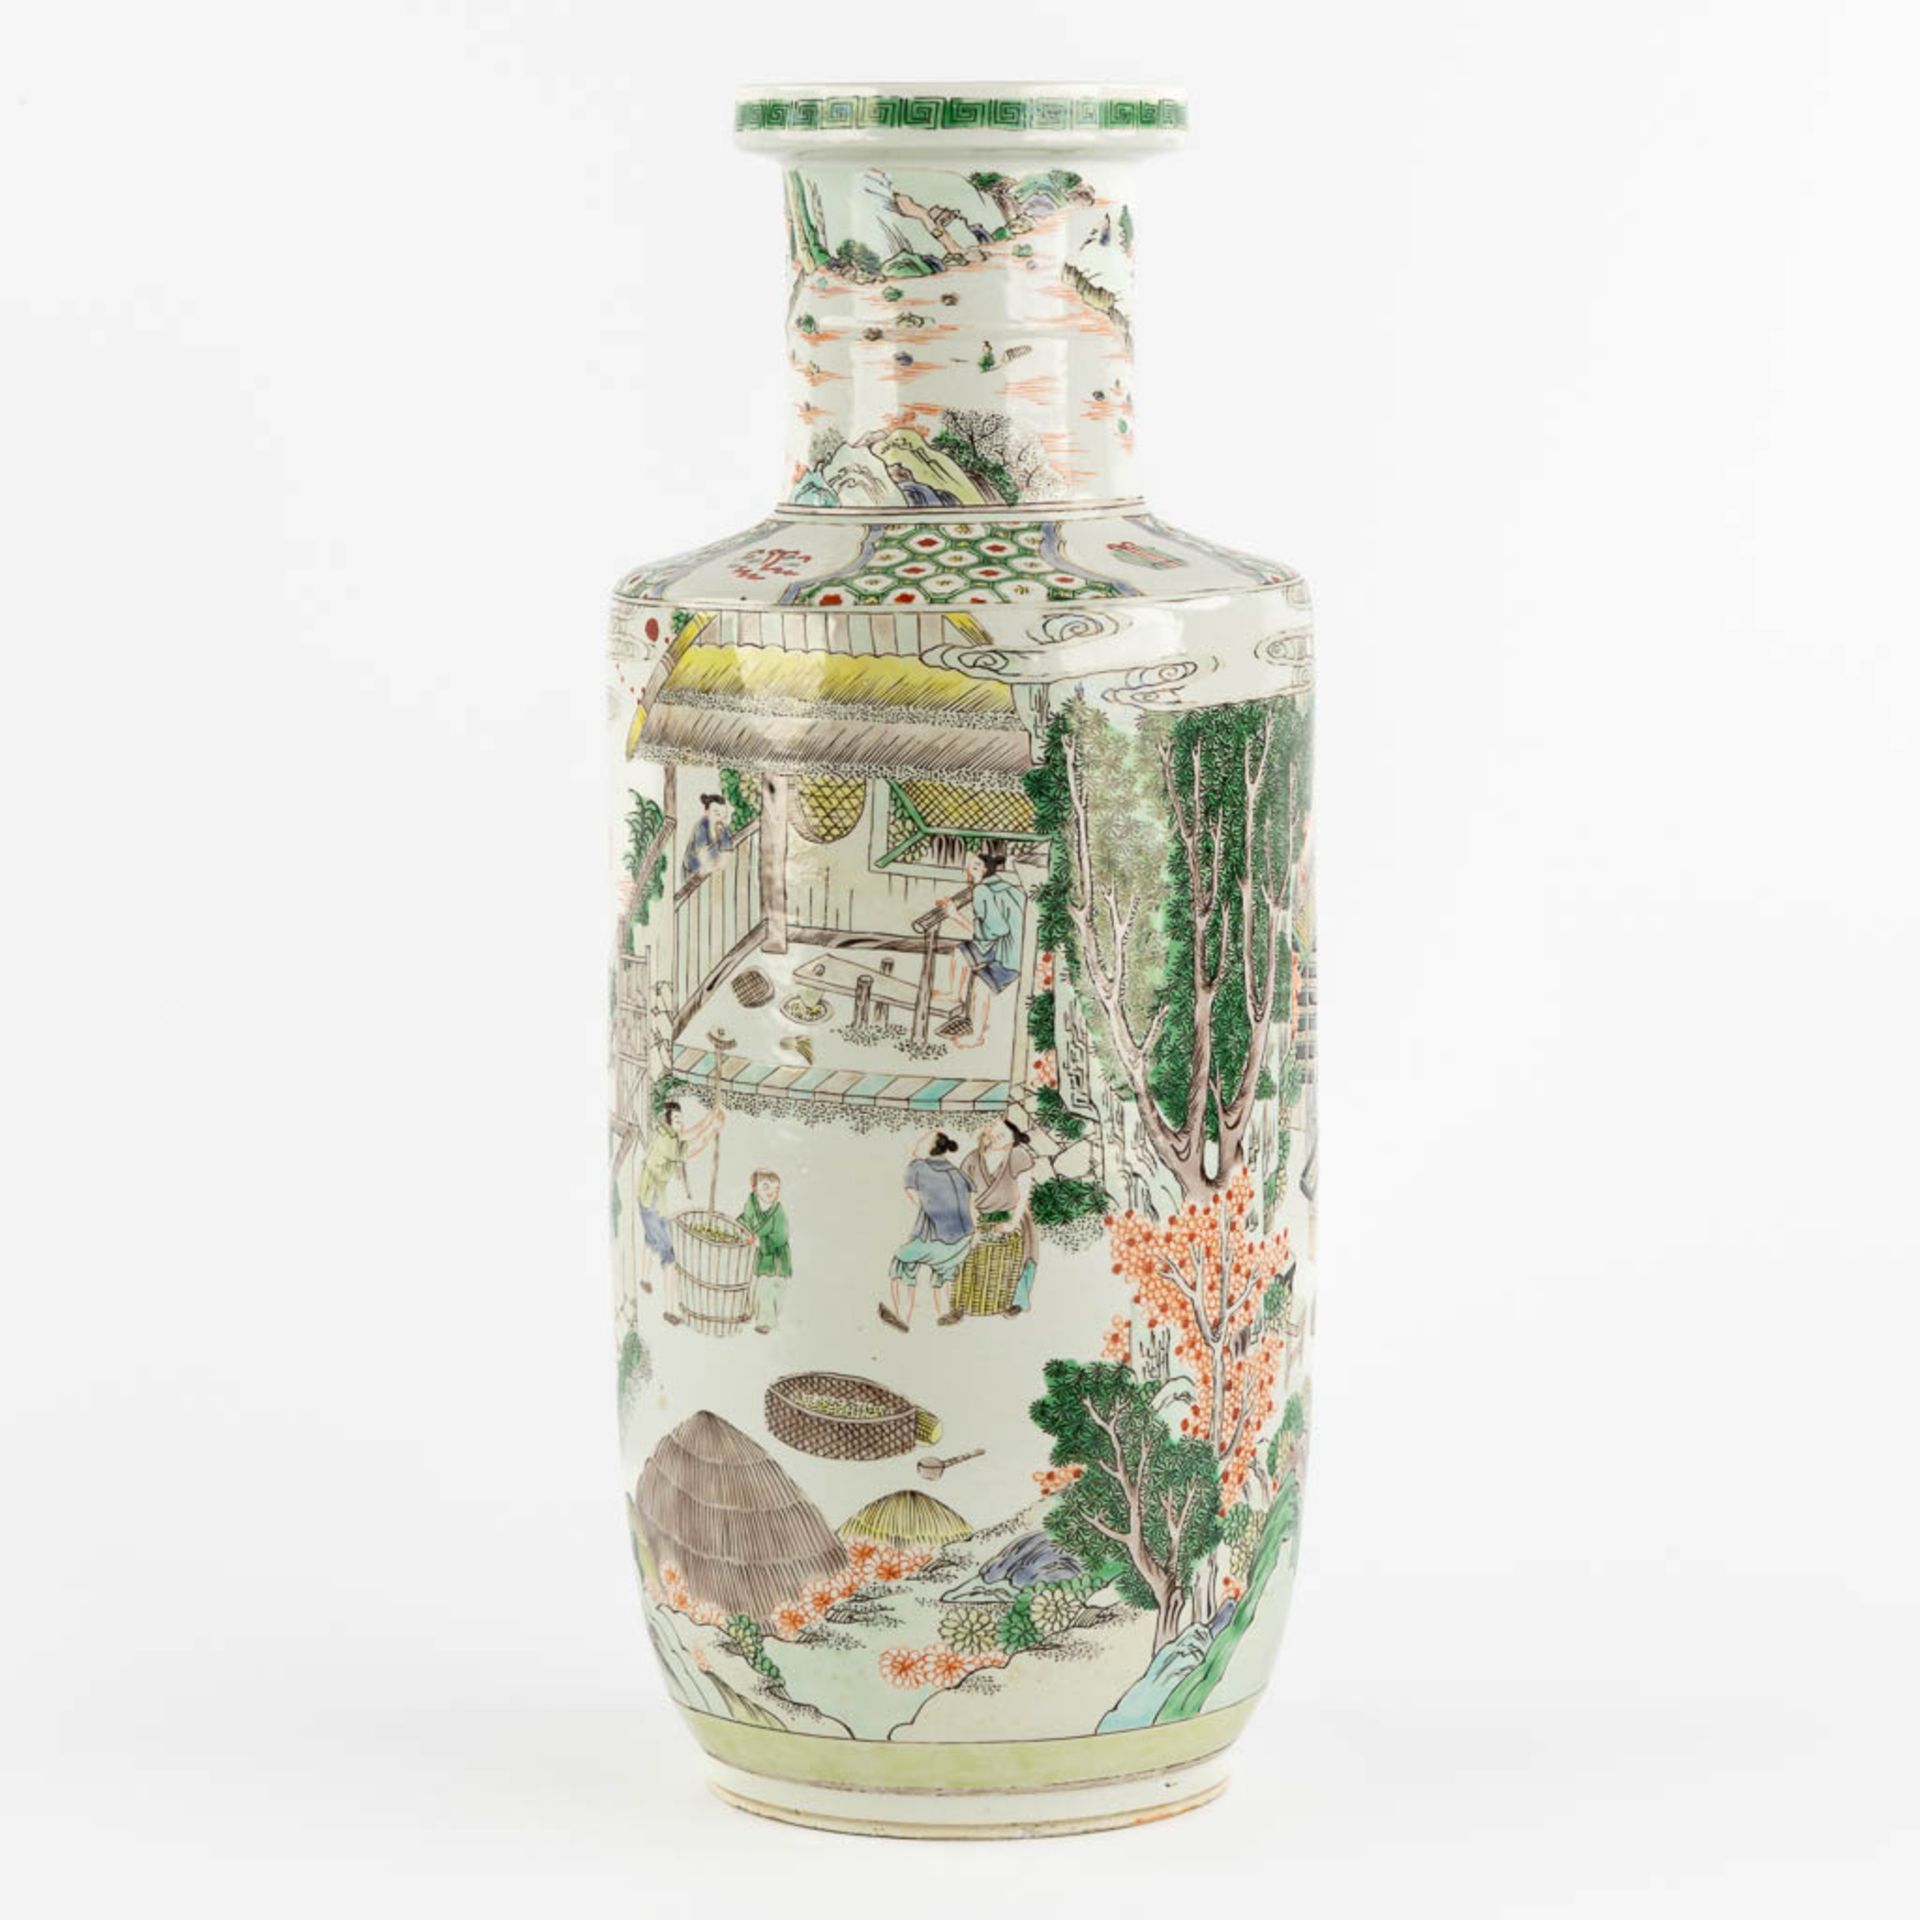 A Chinese Famille Verte 'Roulleau' vase with scènes of rice production. (H:46 x D:18 cm) - Image 7 of 13